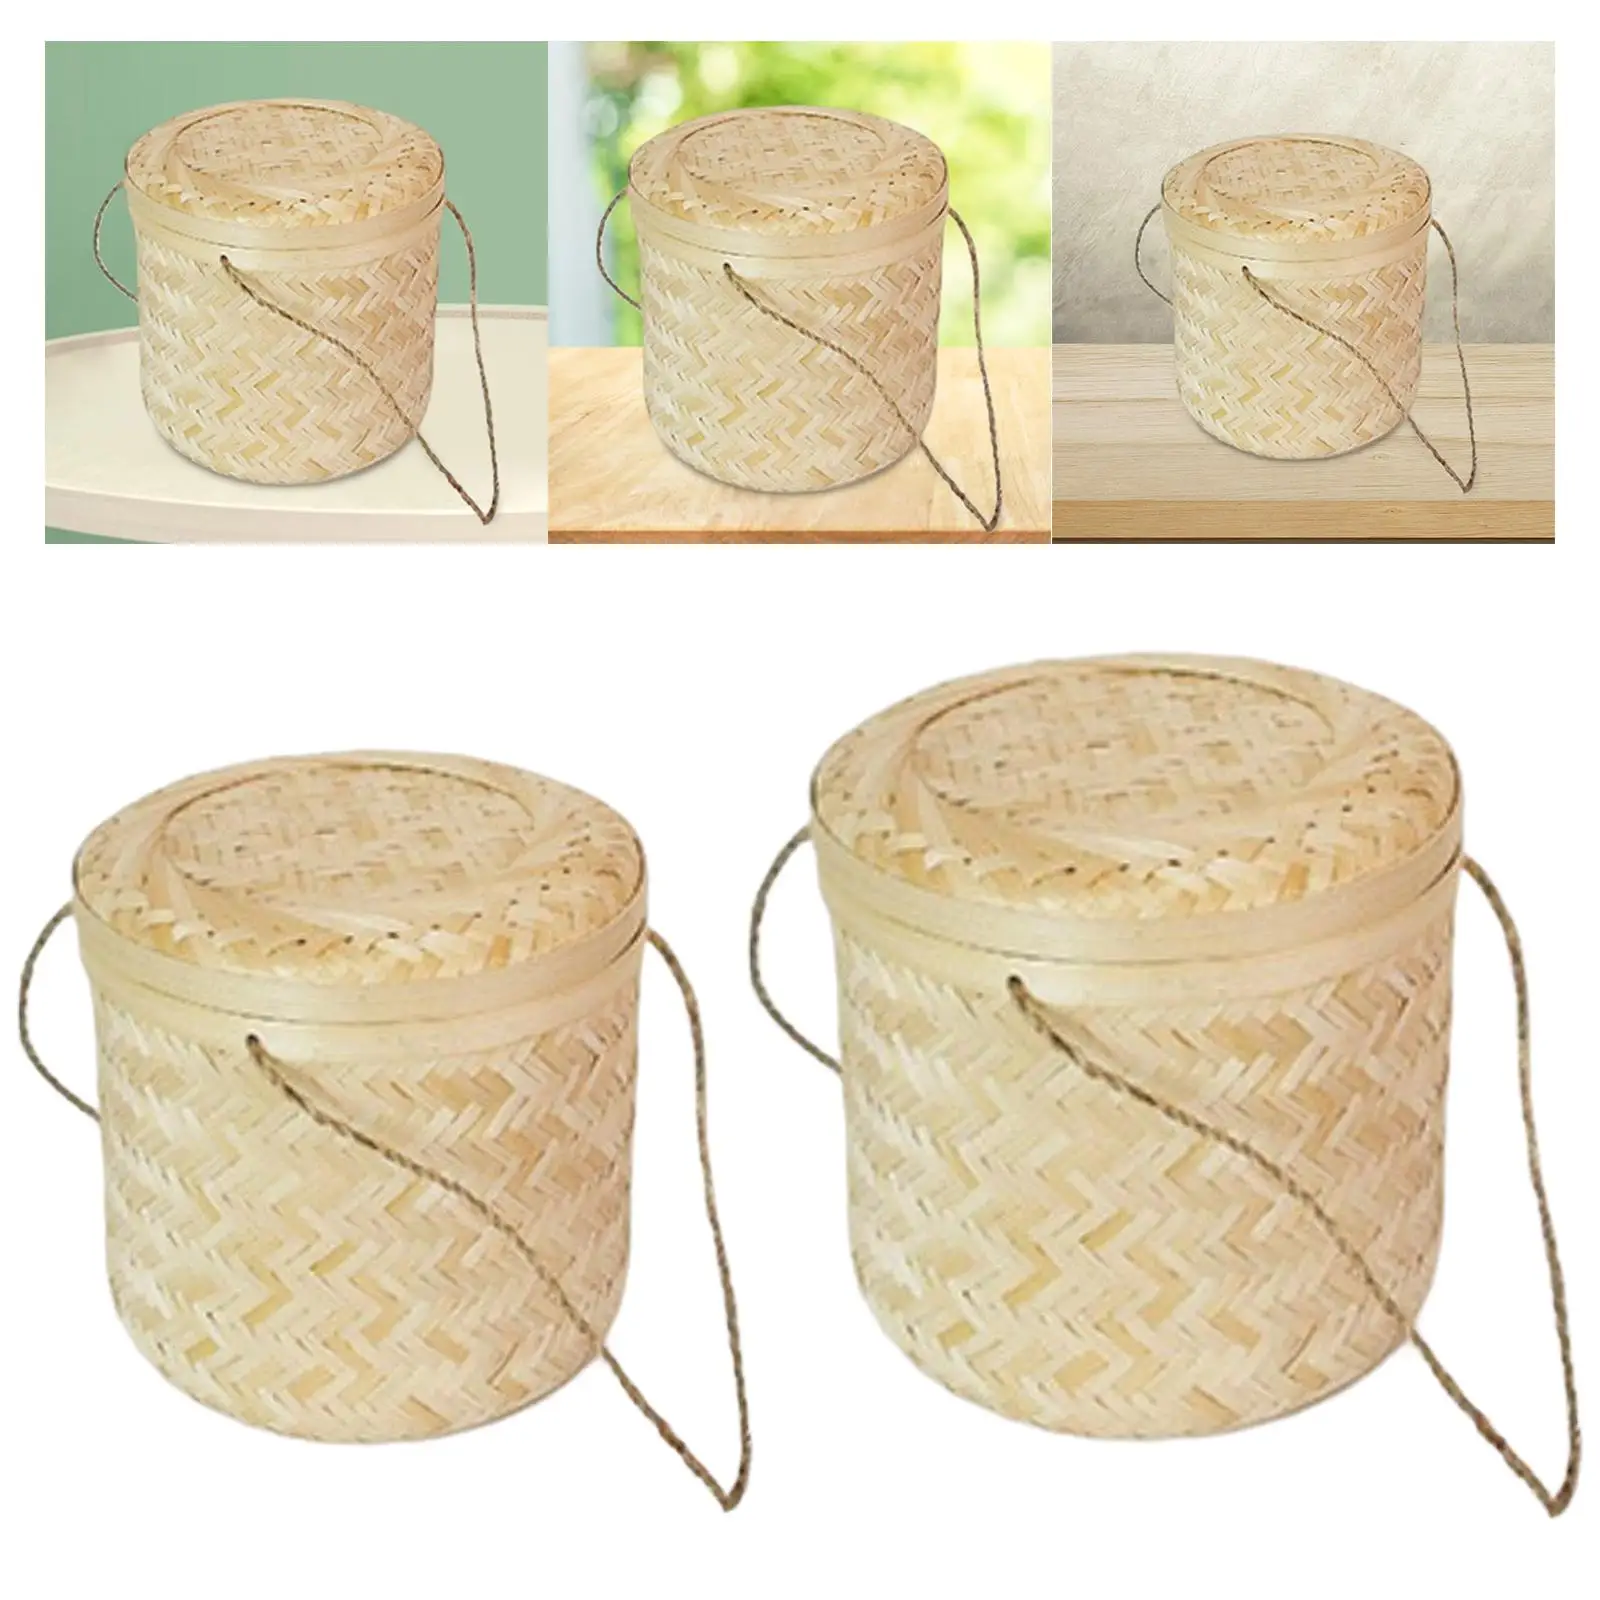 Round Gift Basket Rustic Style Portable Serving Organizer for Tea